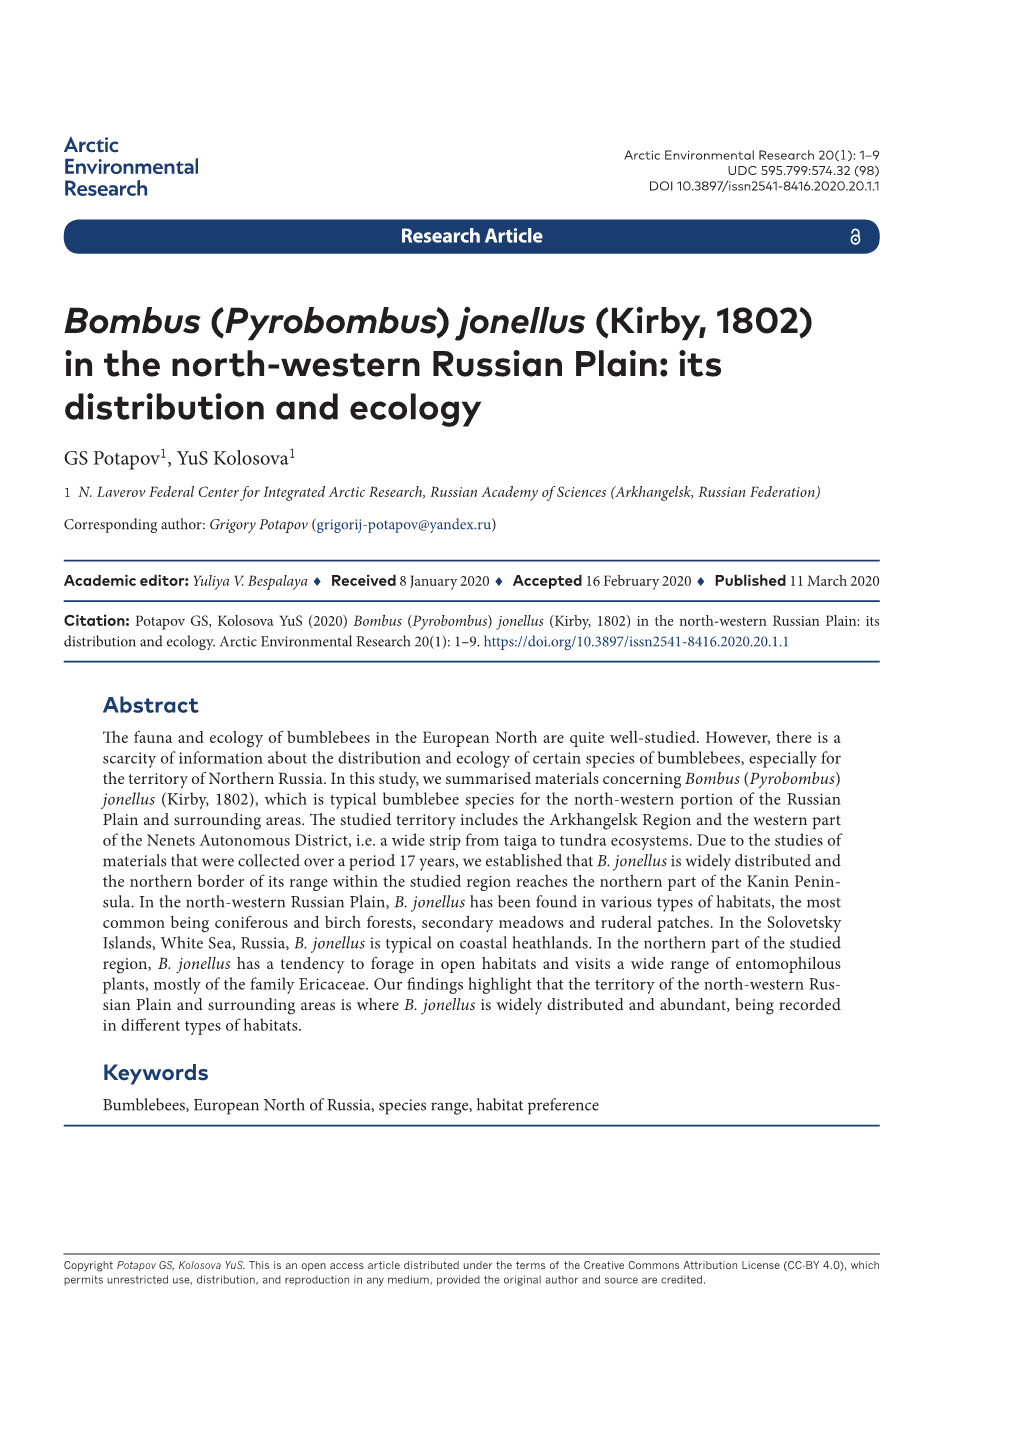 (Pyrobombus) Jonellus (Kirby, 1802) in the North-Western Russian Plain: Its Distribution and Ecology